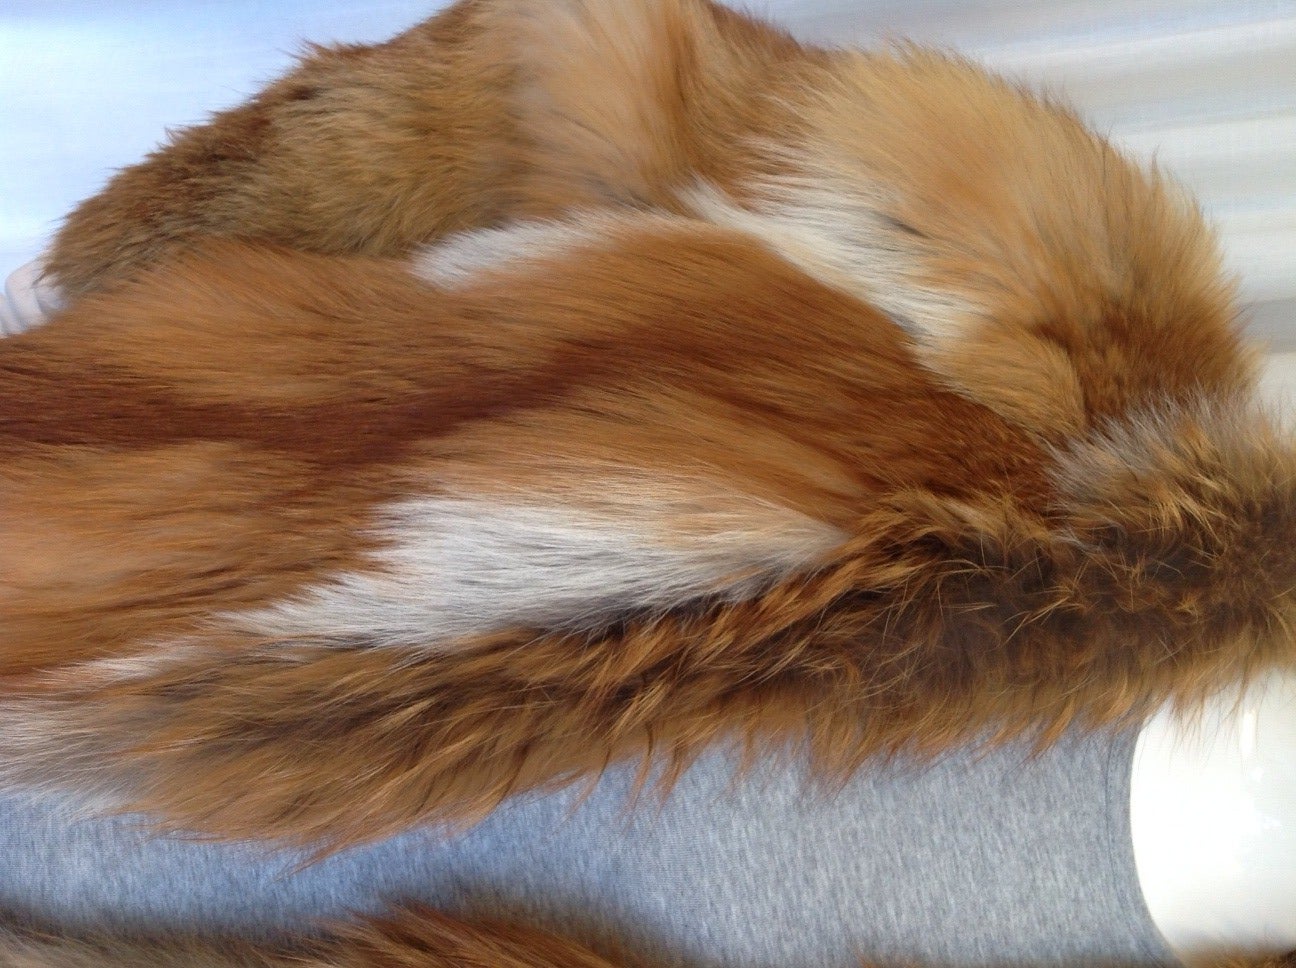 - Custom designed and made fox fur coat
- Closes with hooks
- Made in Europe
- Two exterior pockets